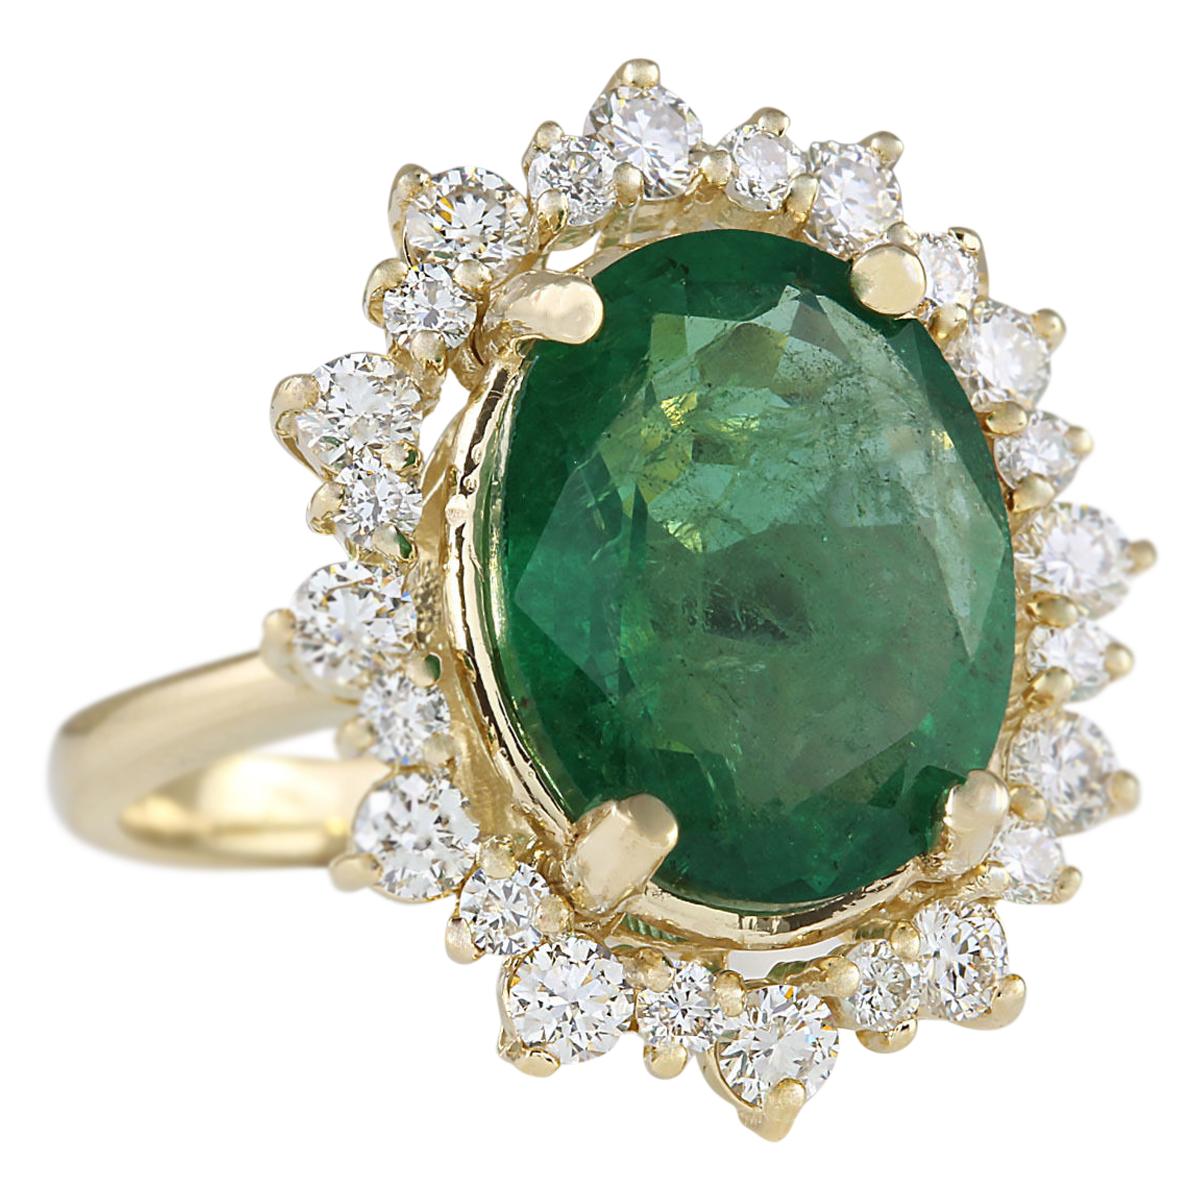 Stamped: 18K Yellow Gold
Total Ring Weight: 7.2 Grams
Ring Length: N/A
Ring Width: N/A
Gemstone Weight: Total  Emerald Weight is 5.72 Carat (Measures: 13.58x10.65 mm)
Color: Green
Diamond Weight: Total  Diamond Weight is 1.05 Carat
Color: F-G,